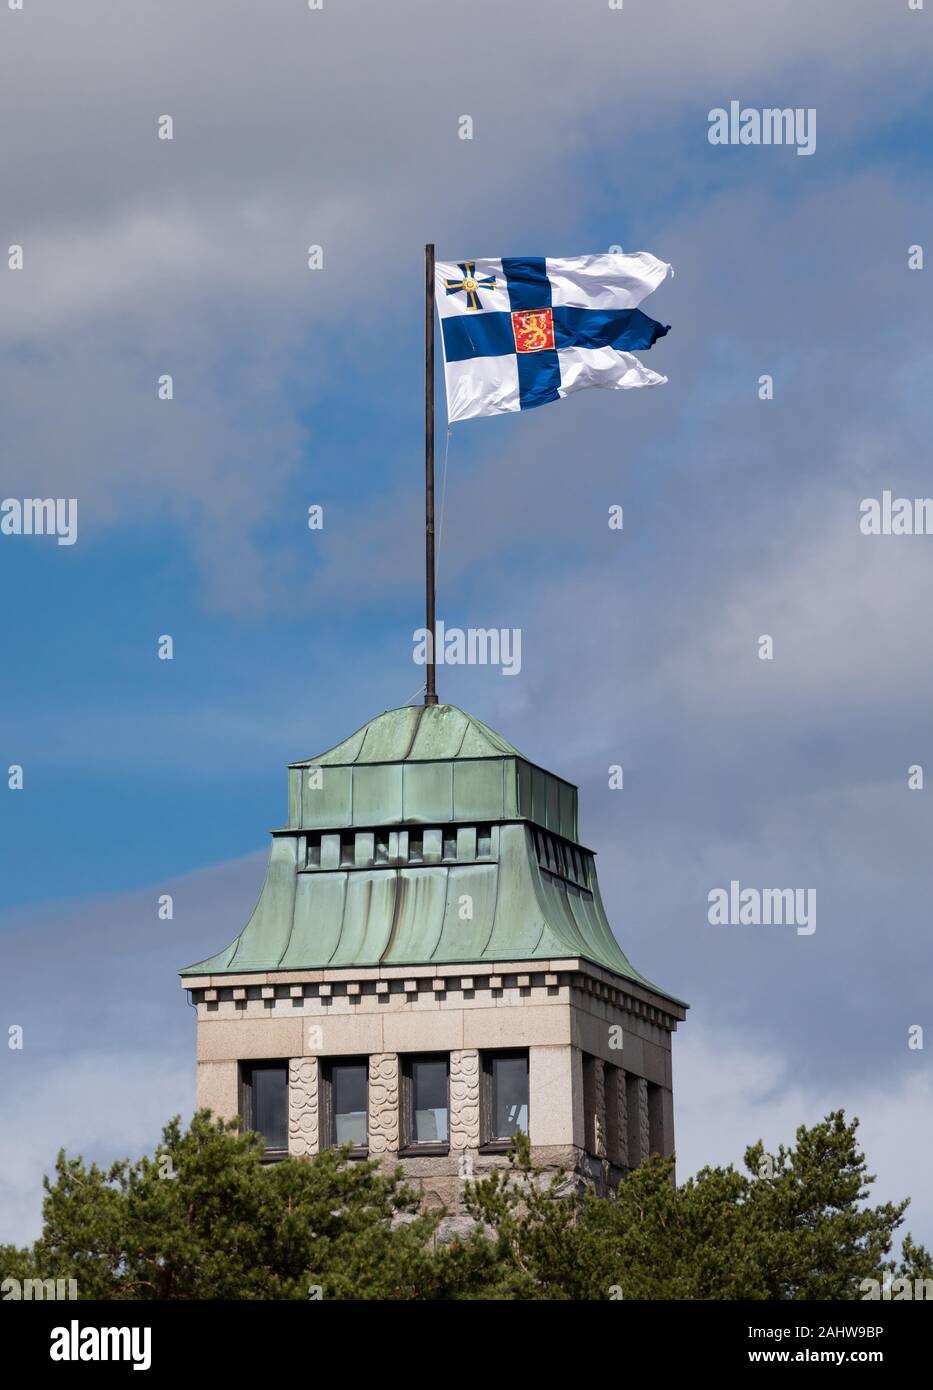 The Finnish Presidential flag flying over the tower of Kultaranta, the summer residence of the President of the Republic in Naantali, Finland. Stock Photo